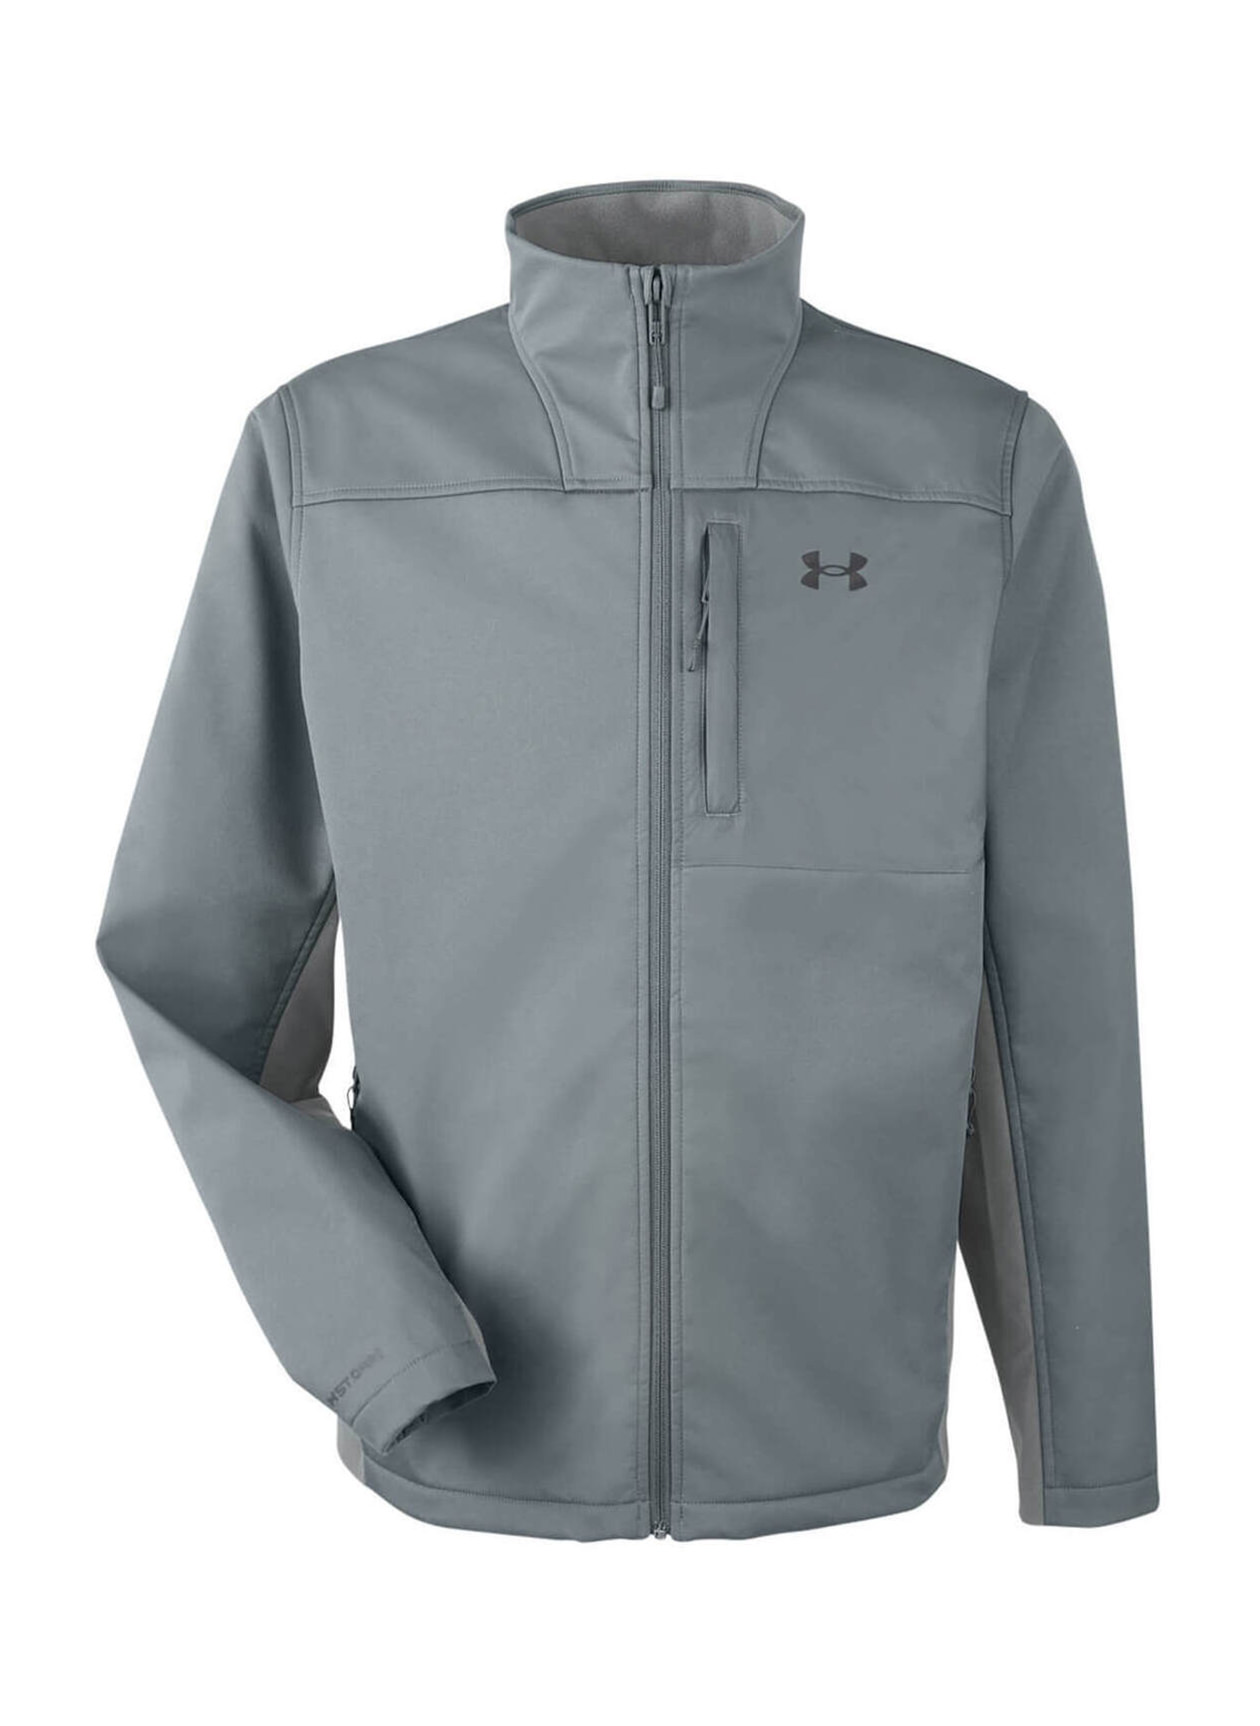 Under Armour ColdGear Infrared Shield 2.0 Jacket with Custom